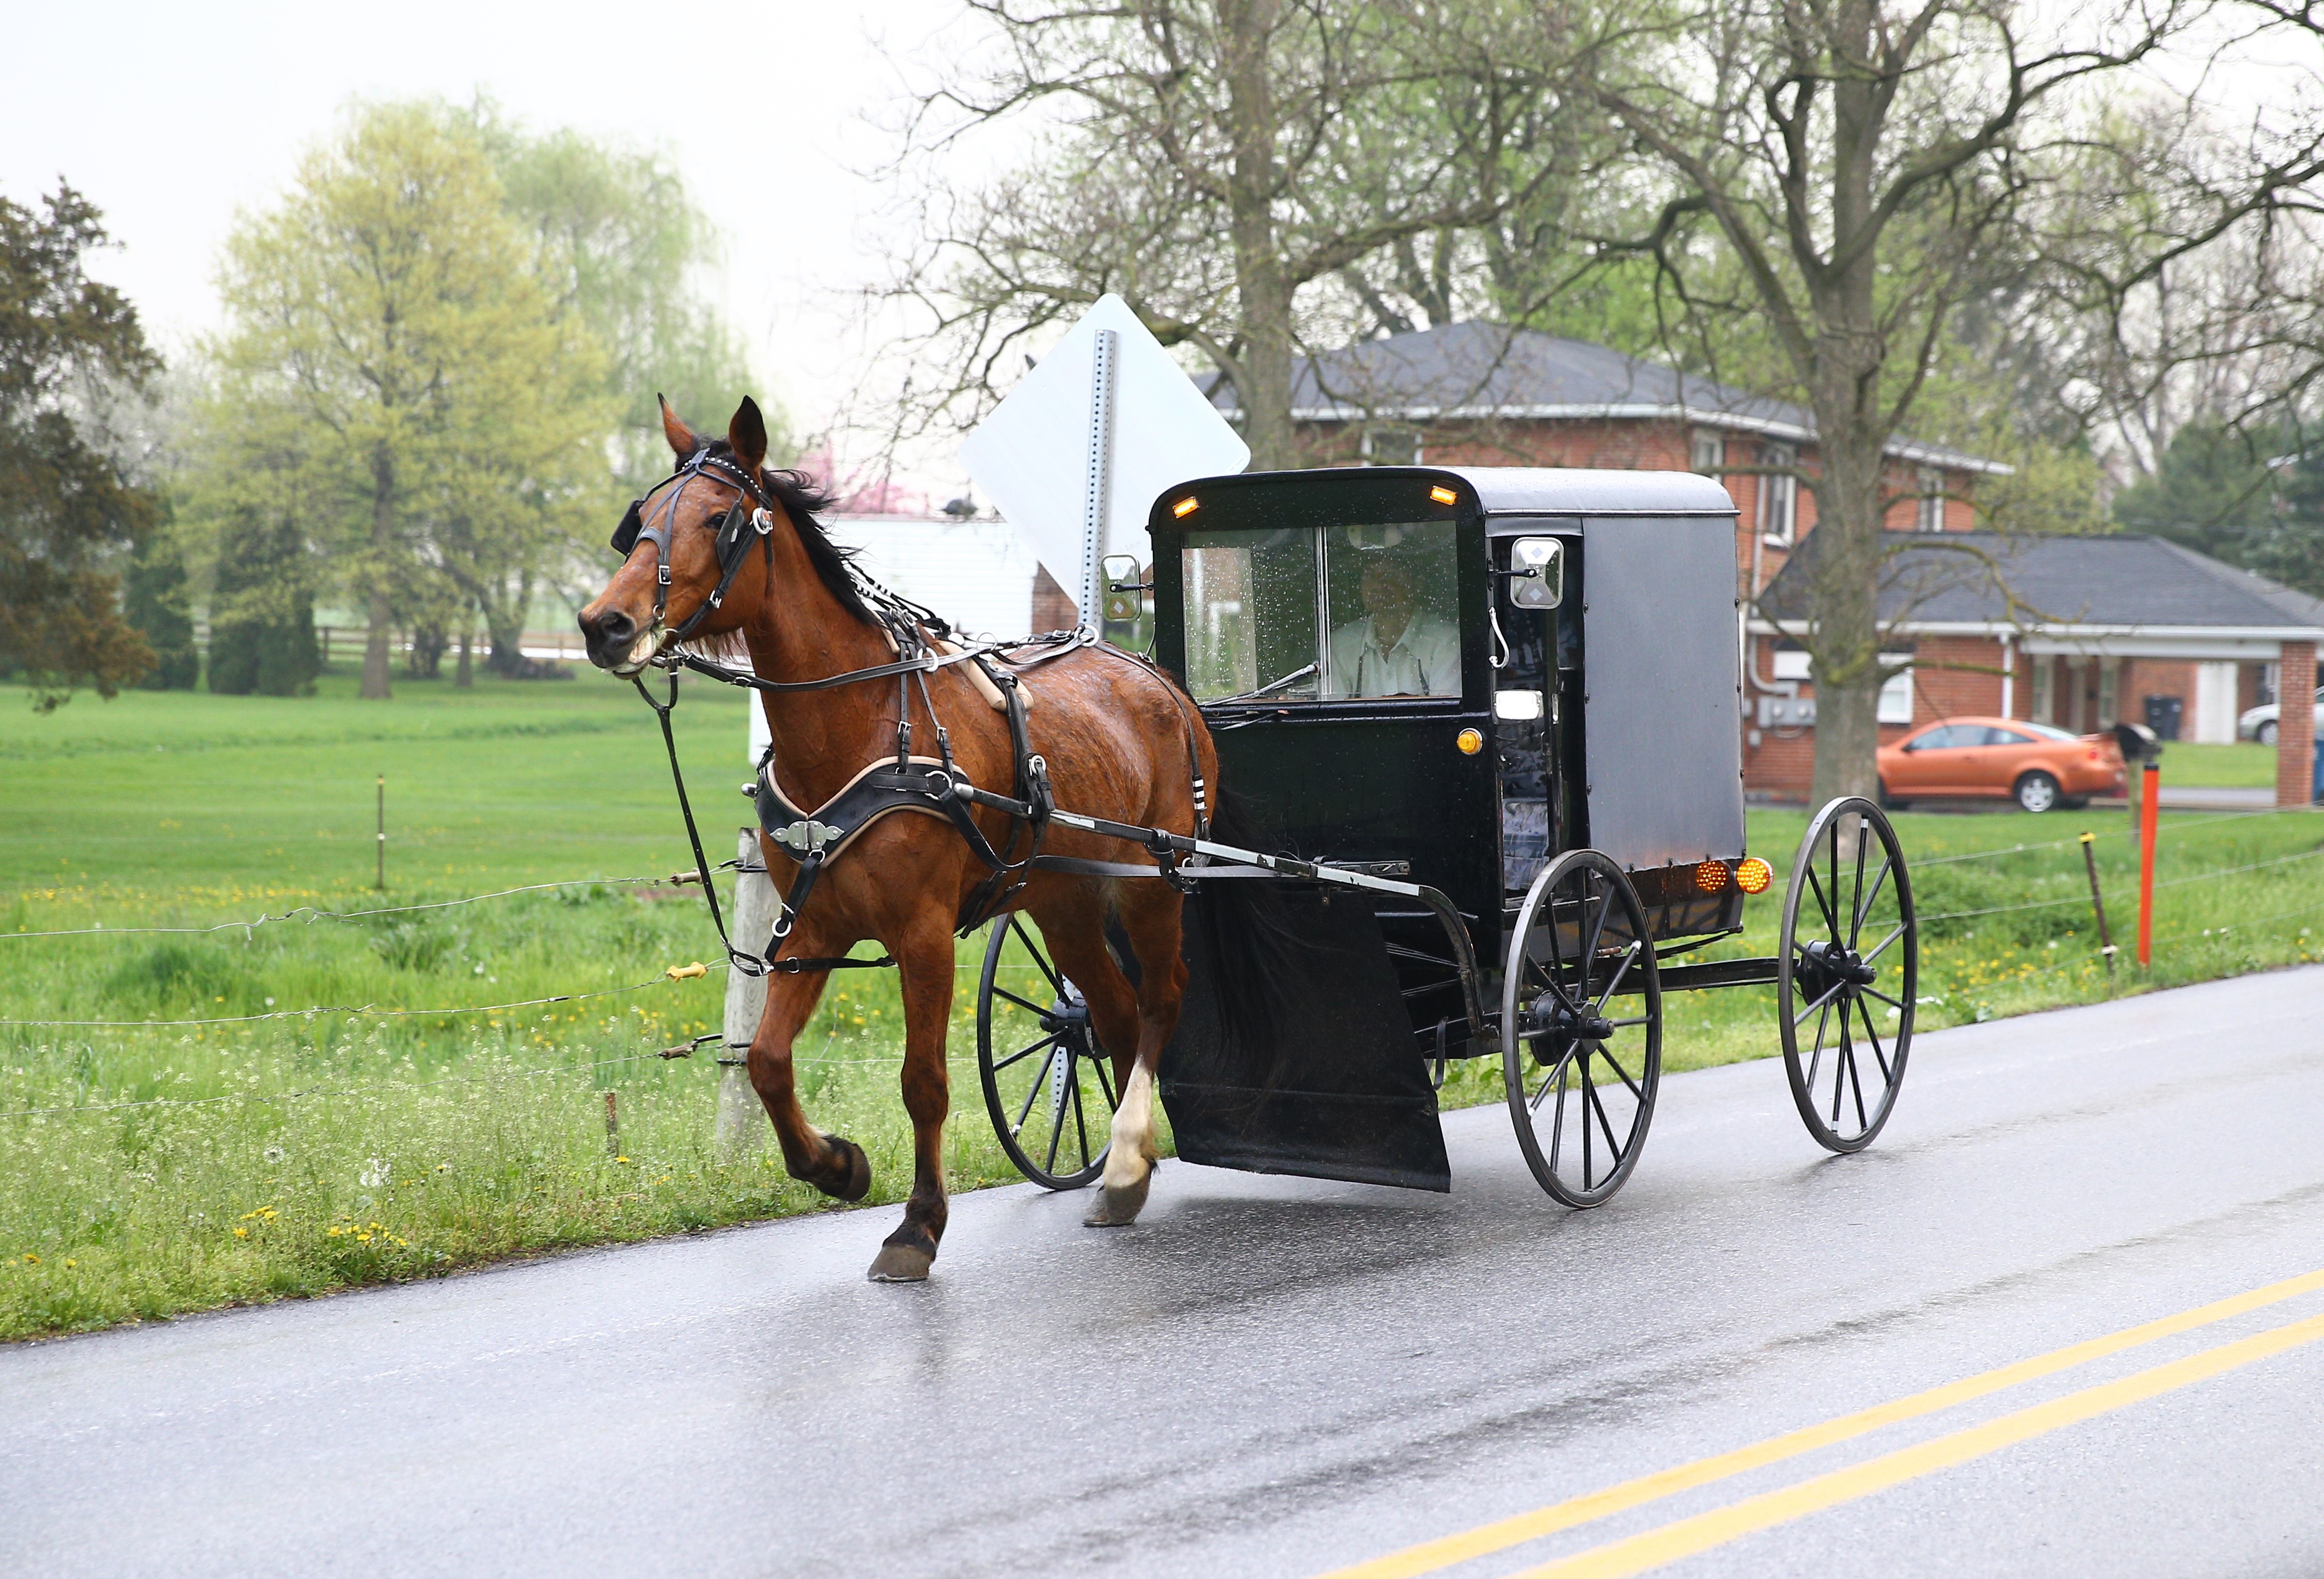 An Amish horse and a buggy are seen on the road in Central Pennsylvania, United States on April 30, 2017. (Anadolu Agency&mdash;Getty Images)